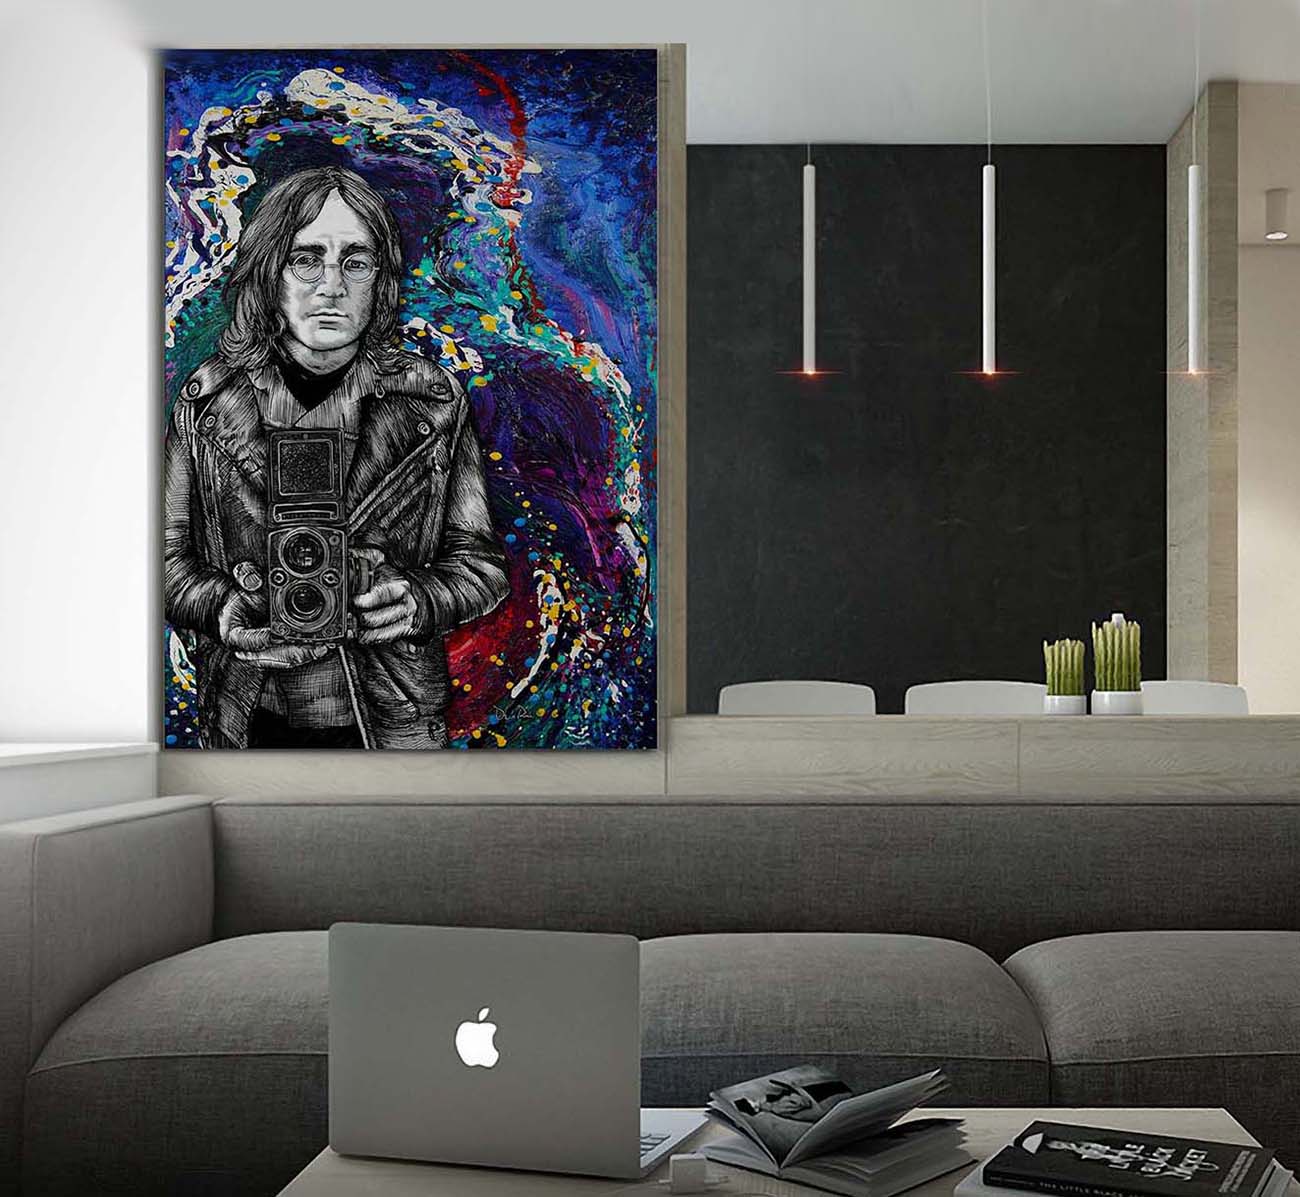 Large print of John Lennon Twin Lens mixed media by Dough LaRue in a modern living room behind a Mac laptop